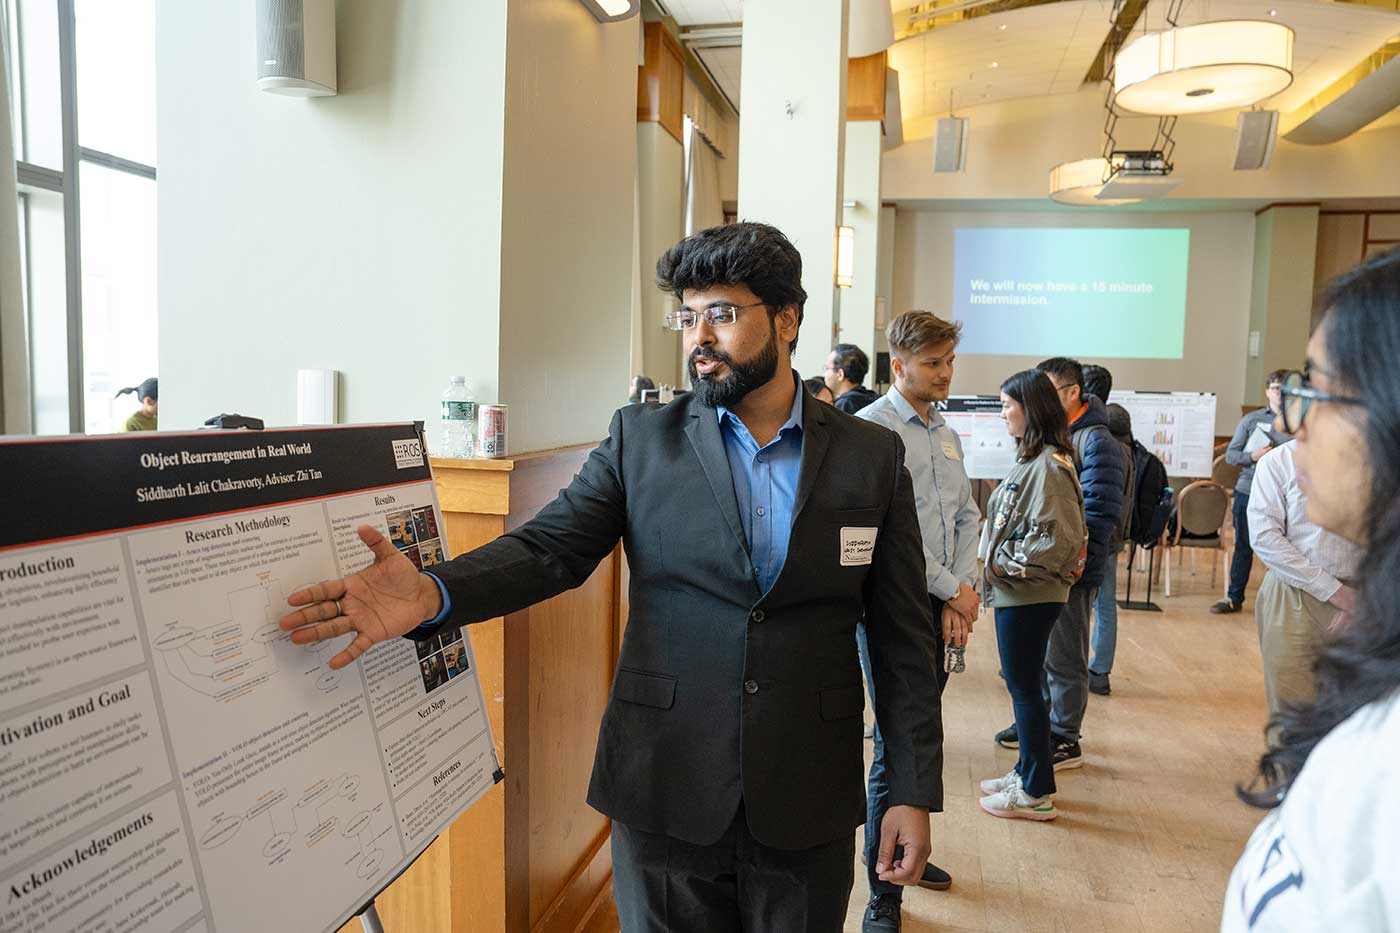 Siddharth Lalit Chakravorty explains his research poster to an onlooker